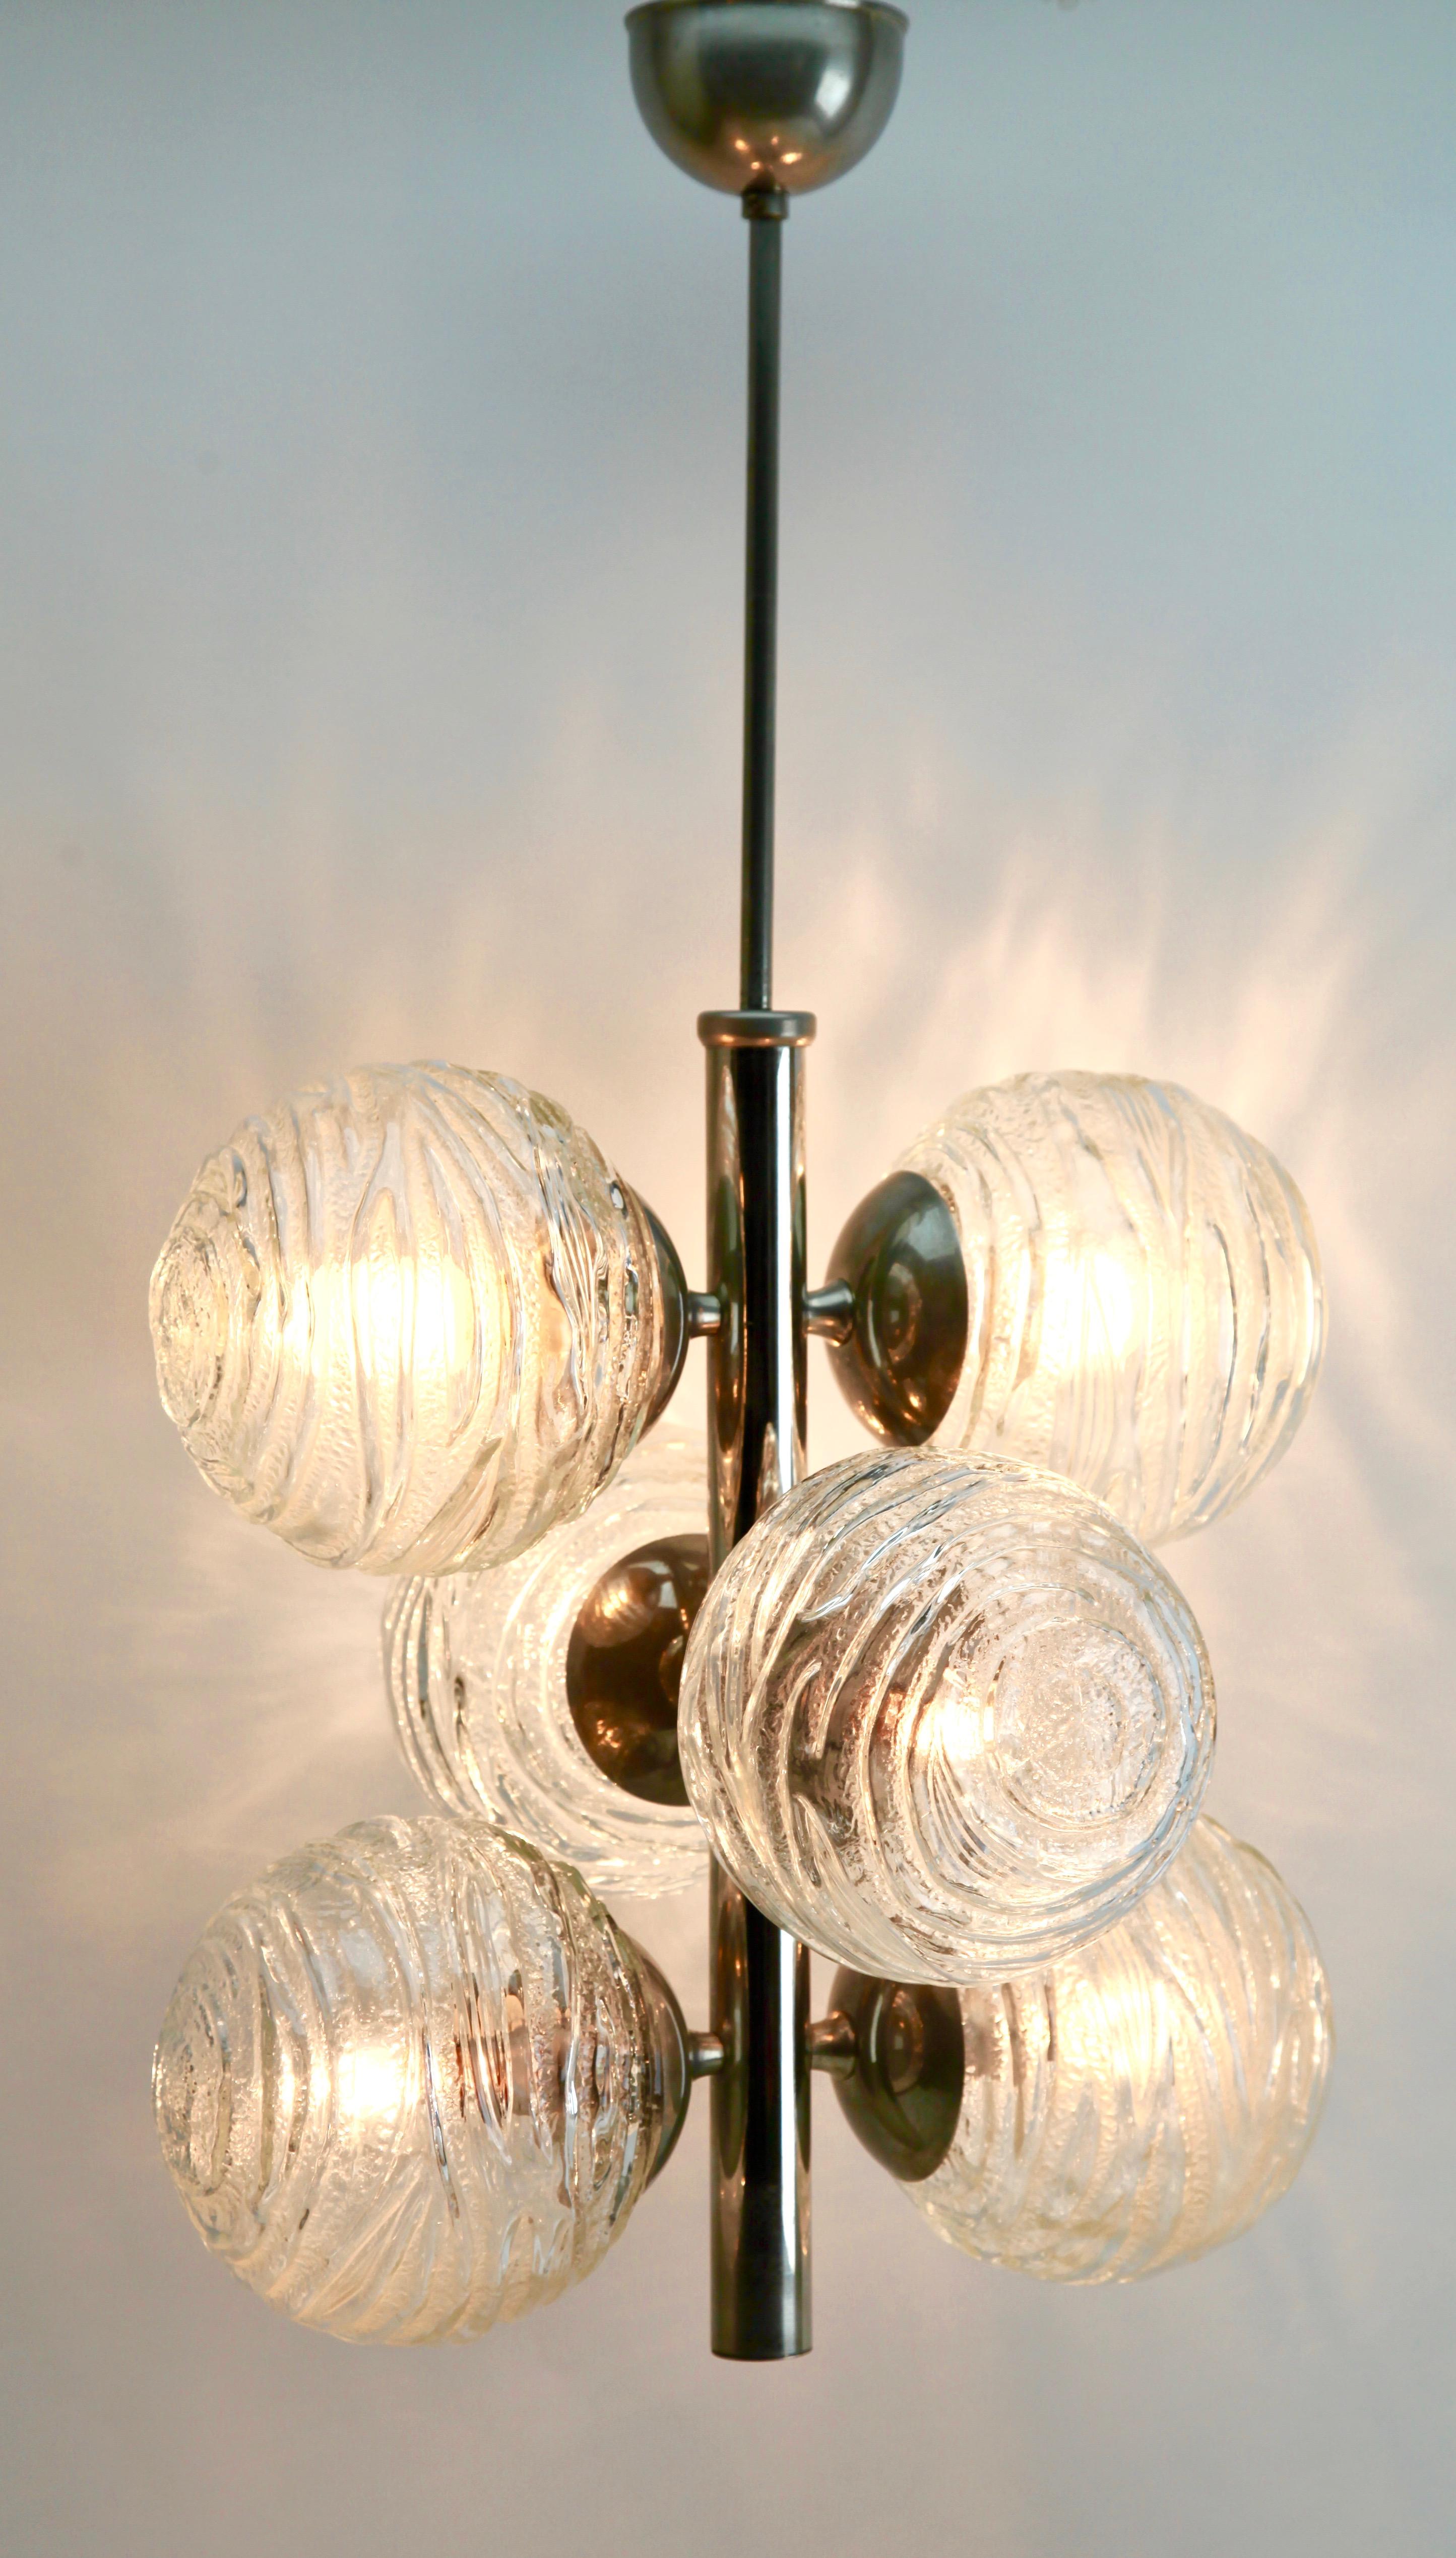 From the range by the Doria Leuchten Company, this center-light features six lamps arranged as three pairs) on a central chromed stem. Each lamp has a fitting on a chromed plate, and each holds a round globular shade of clear glass sculpted to